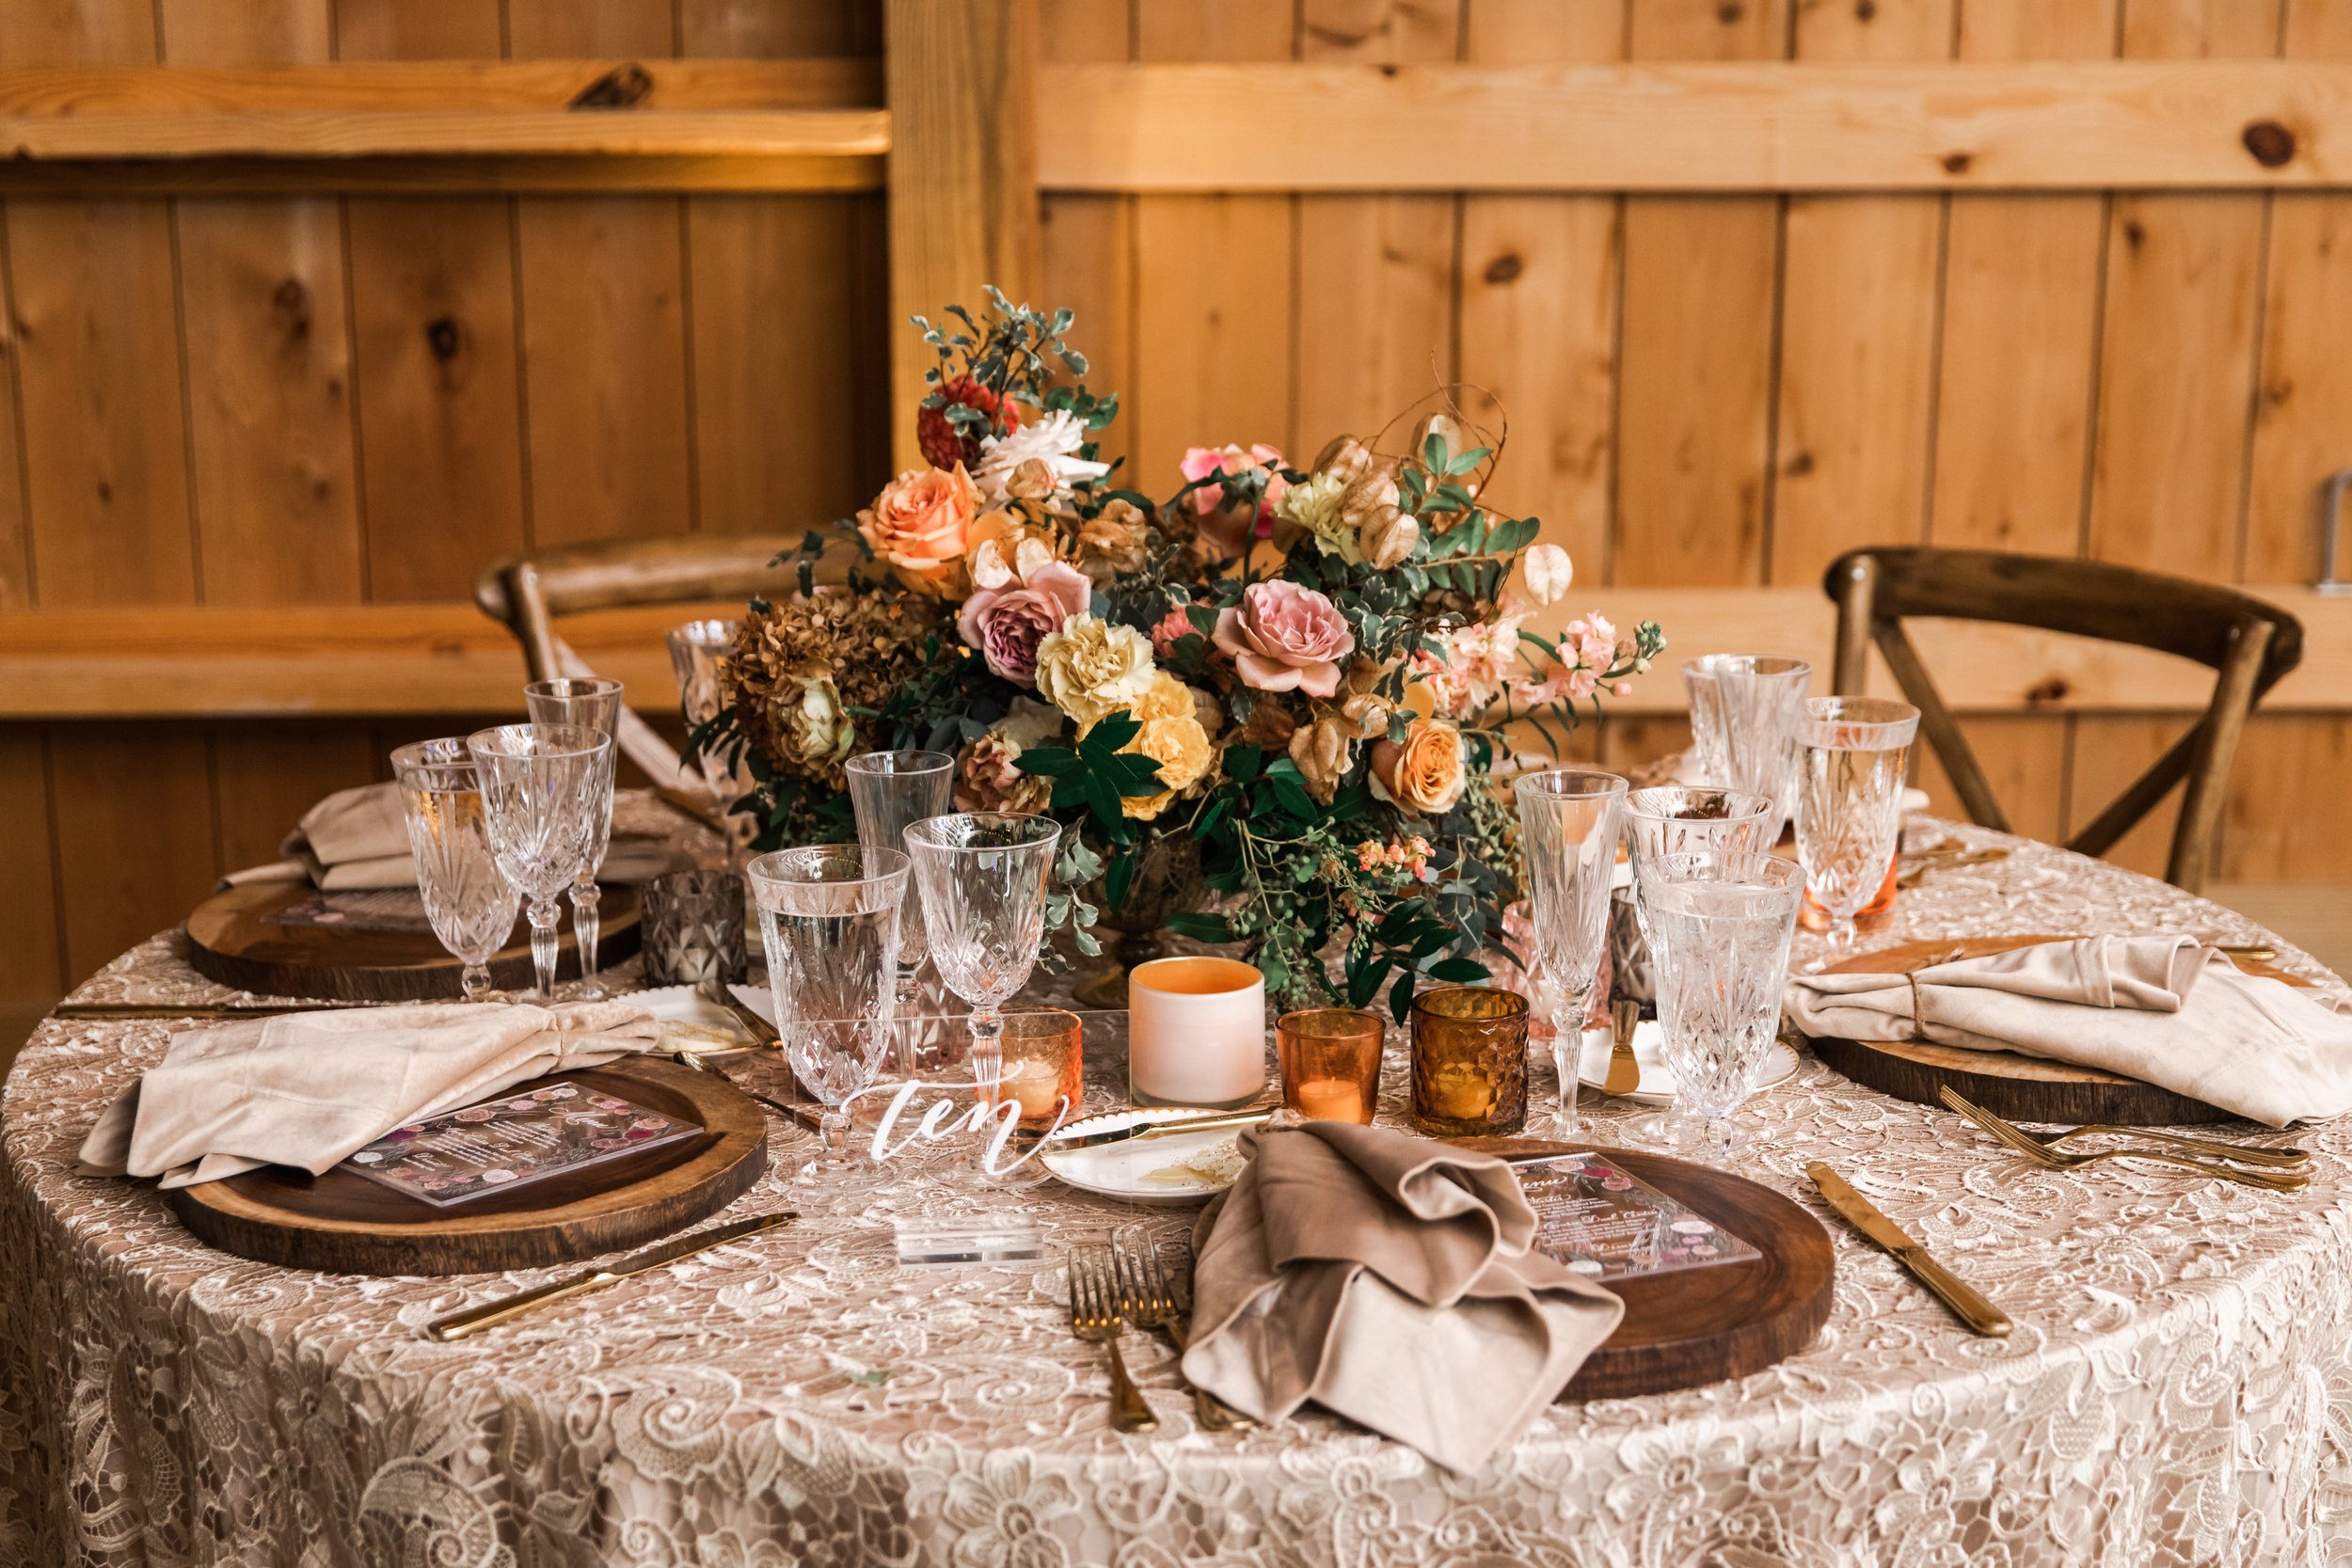 Beautiful fall floral centerpieces warm this reception space with a sunset color palette. Garden roses, ranunculus, double brownie tulips, and lisianthus create hues of terra cotta, blush pink, copper, and yellow. Designed by Rosemary and Finch in Na